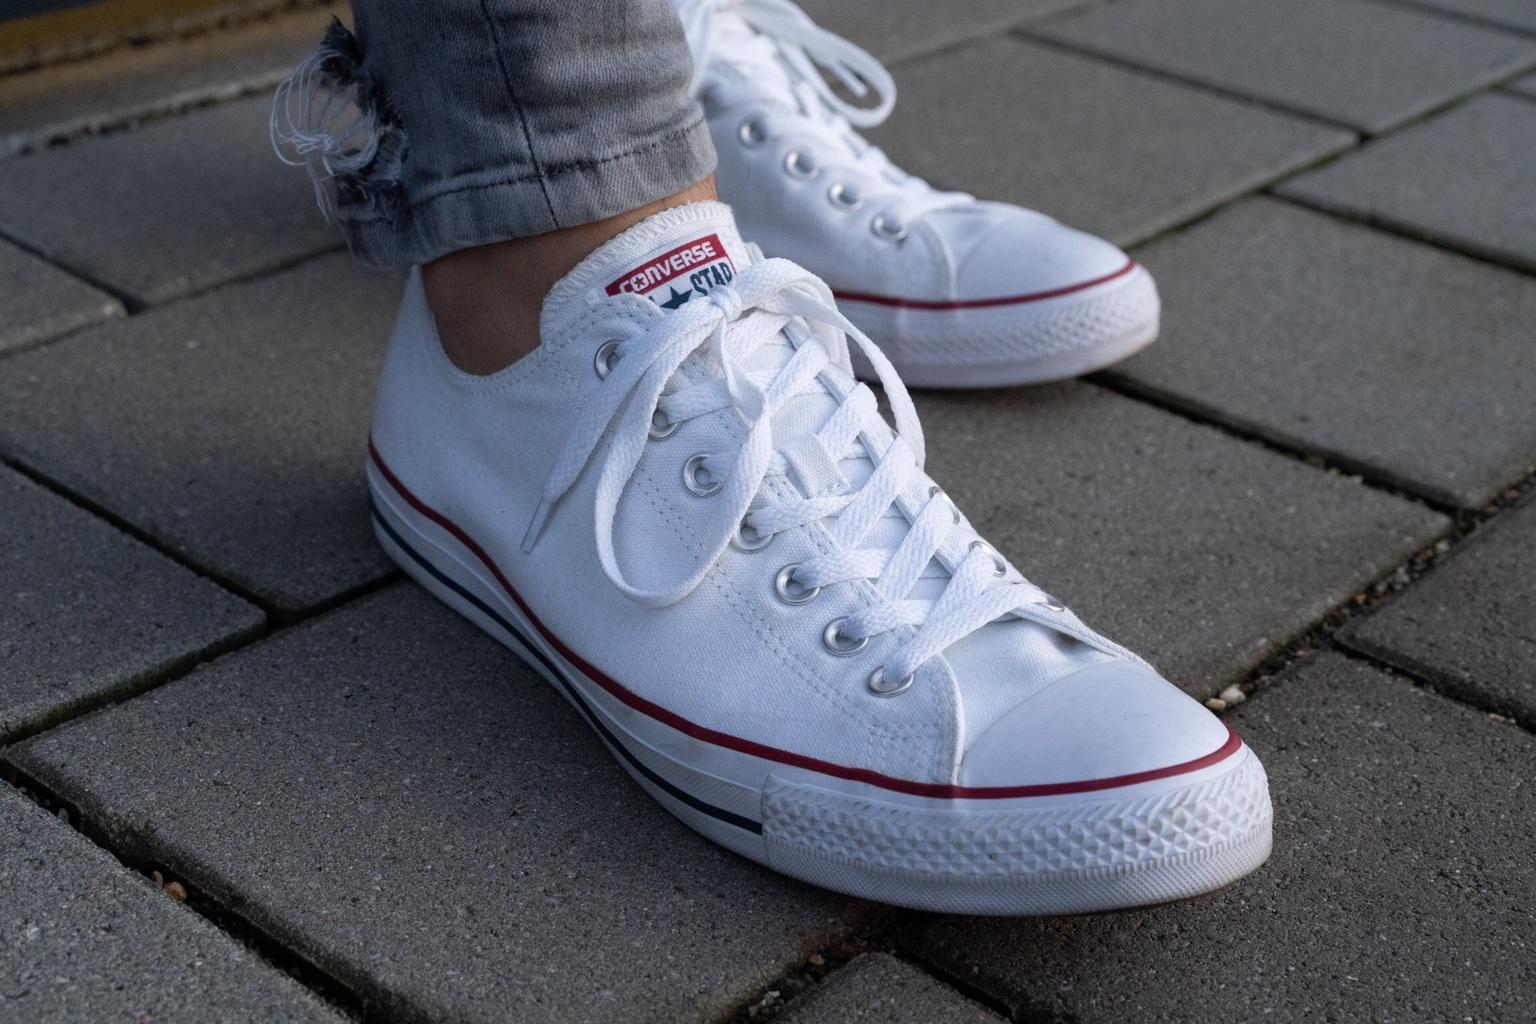 Converse Chucks Low top in 73033 Göppingen for €45.00 for sale | Shpock